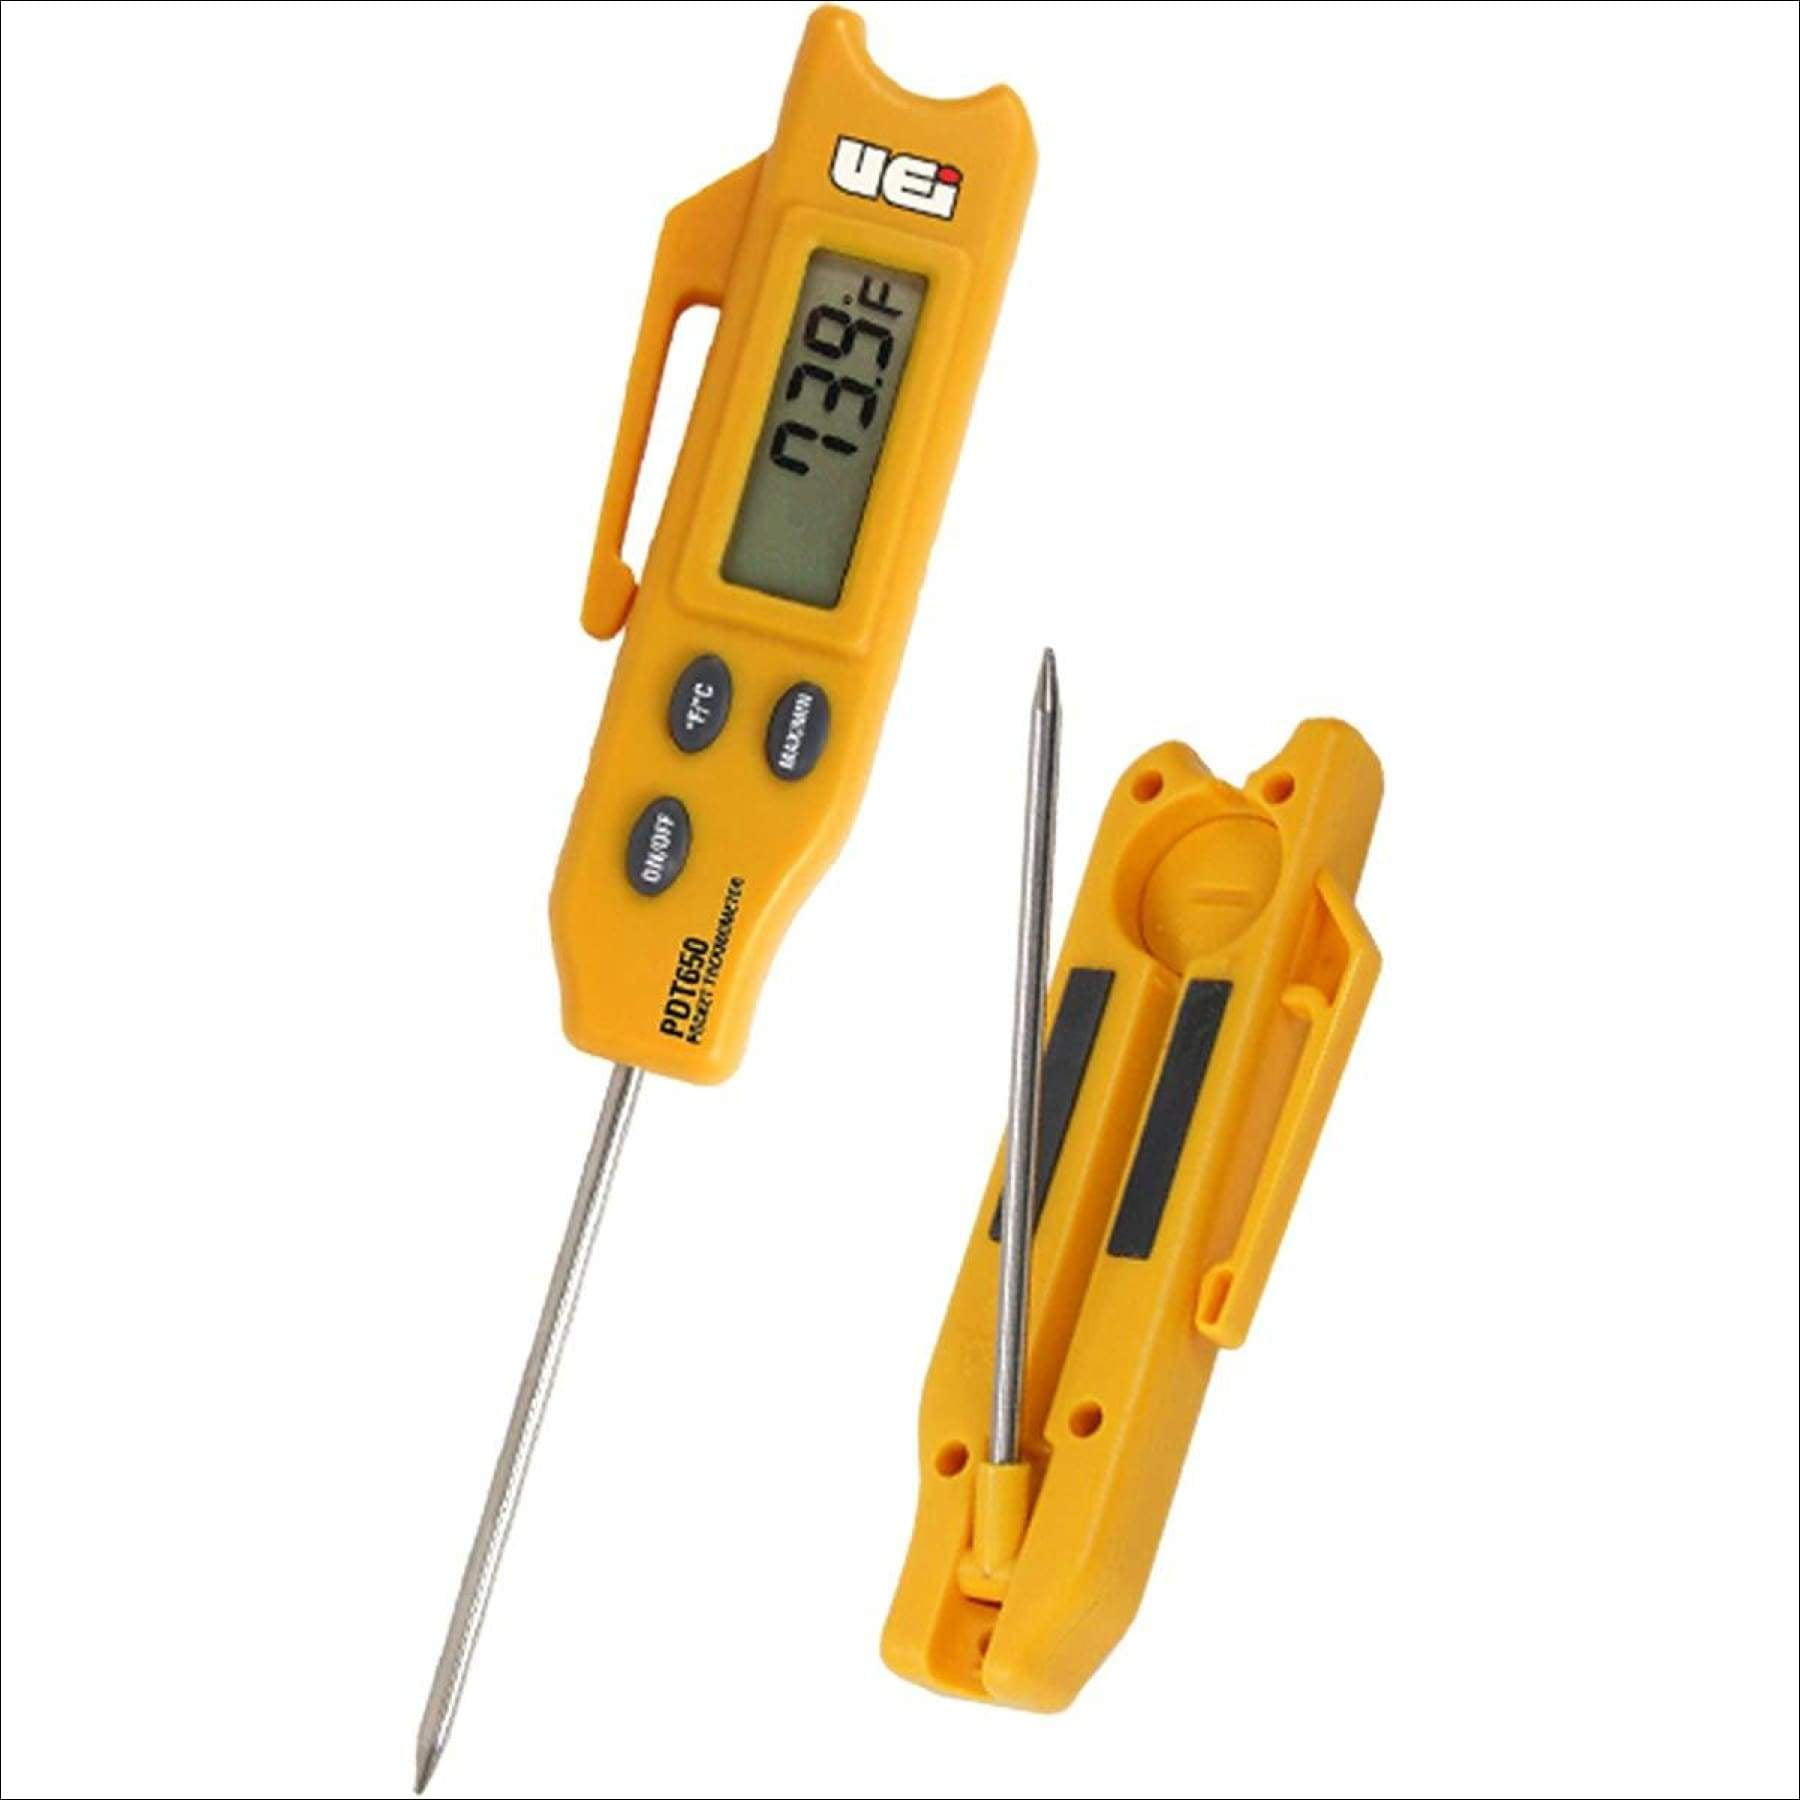 Pack of 2 UEi Test Instruments PDT650 Folding Pocket Digital Thermometer,Yellow